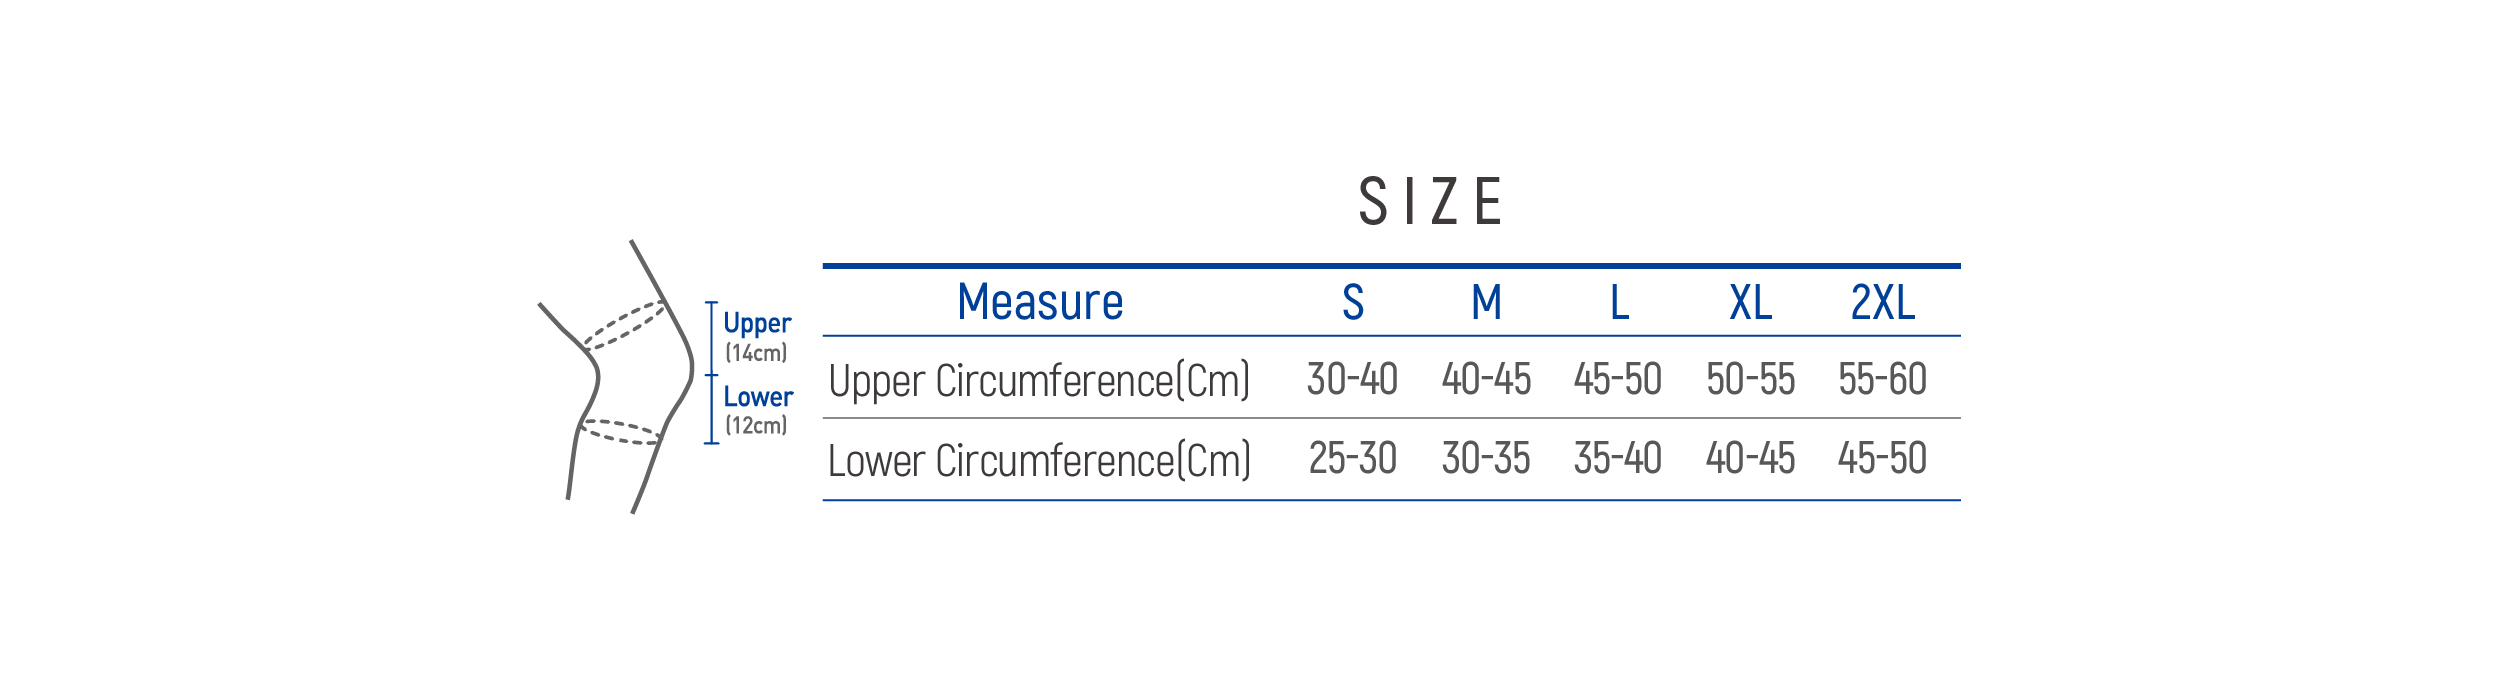 DR-K033 Size table image